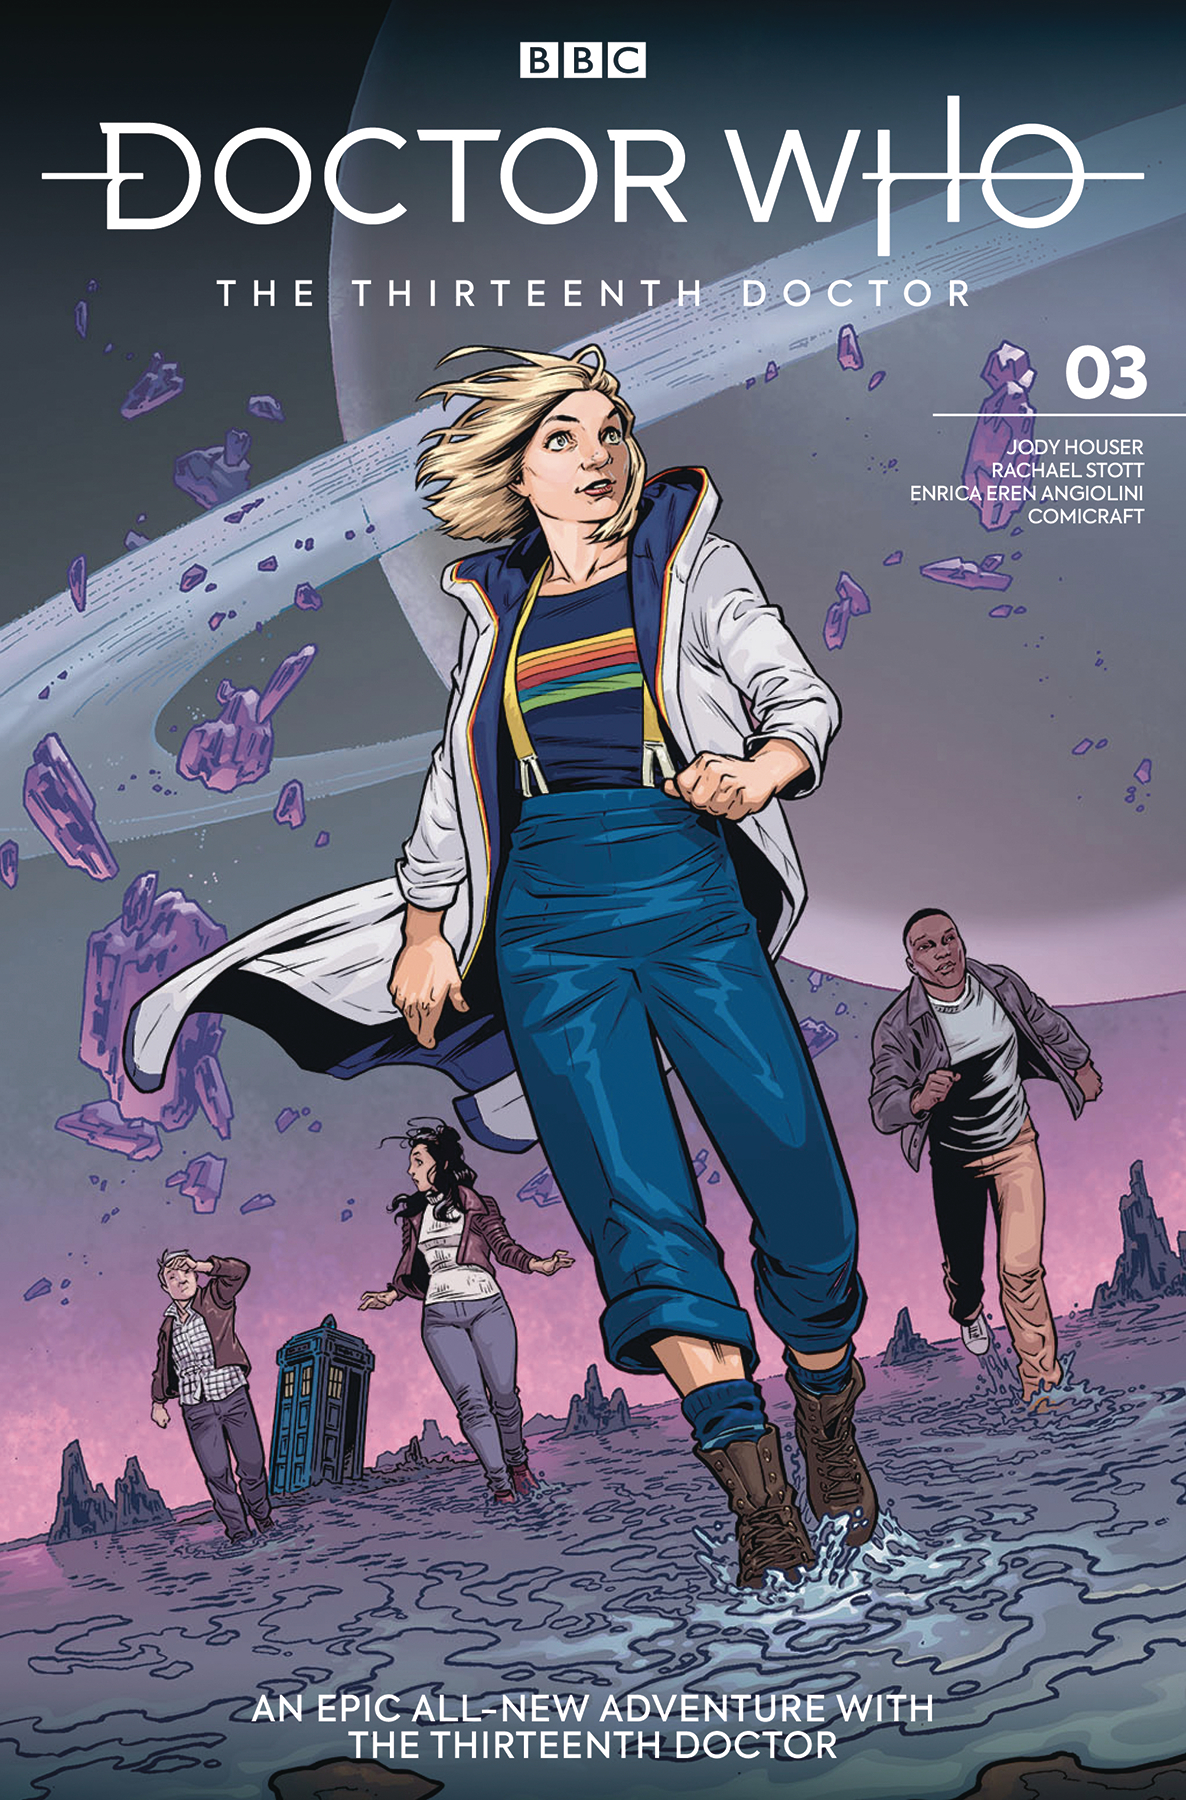 Doctor Who: The Thirteenth Doctor no. 3 (2018 Series)